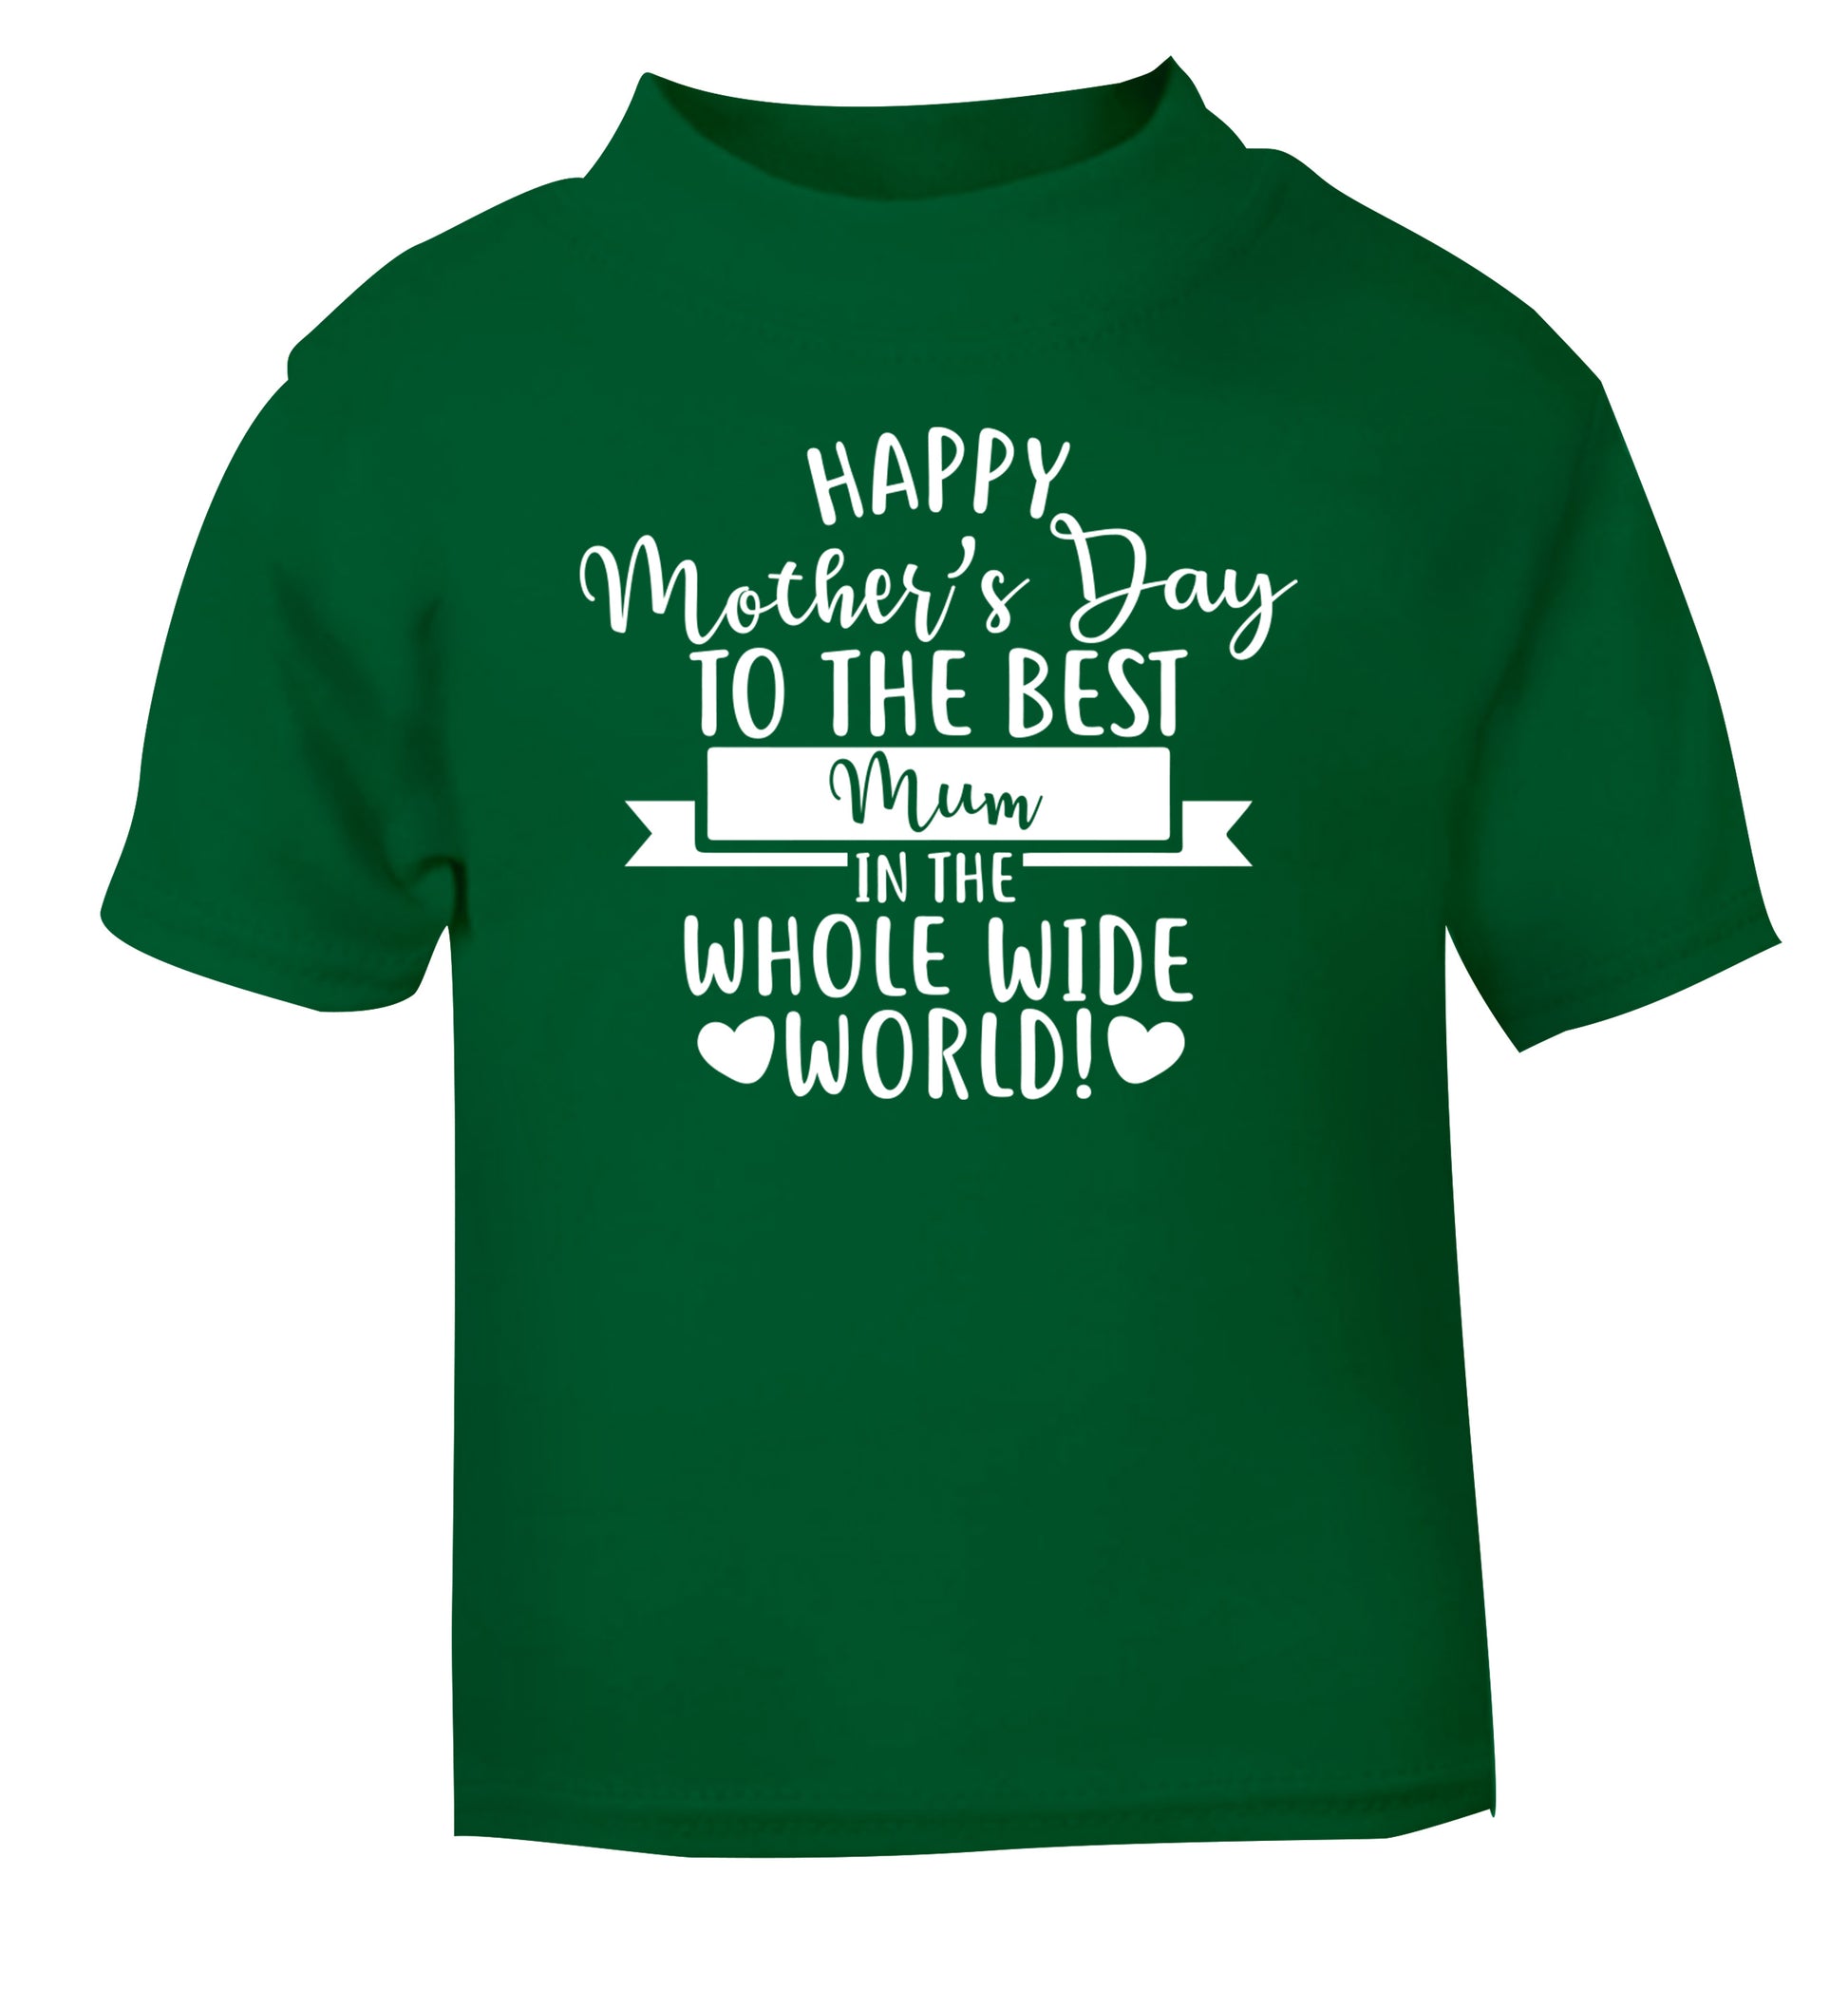 Happy Mother's Day to the best mum in the whole wide world! green Baby Toddler Tshirt 2 Years